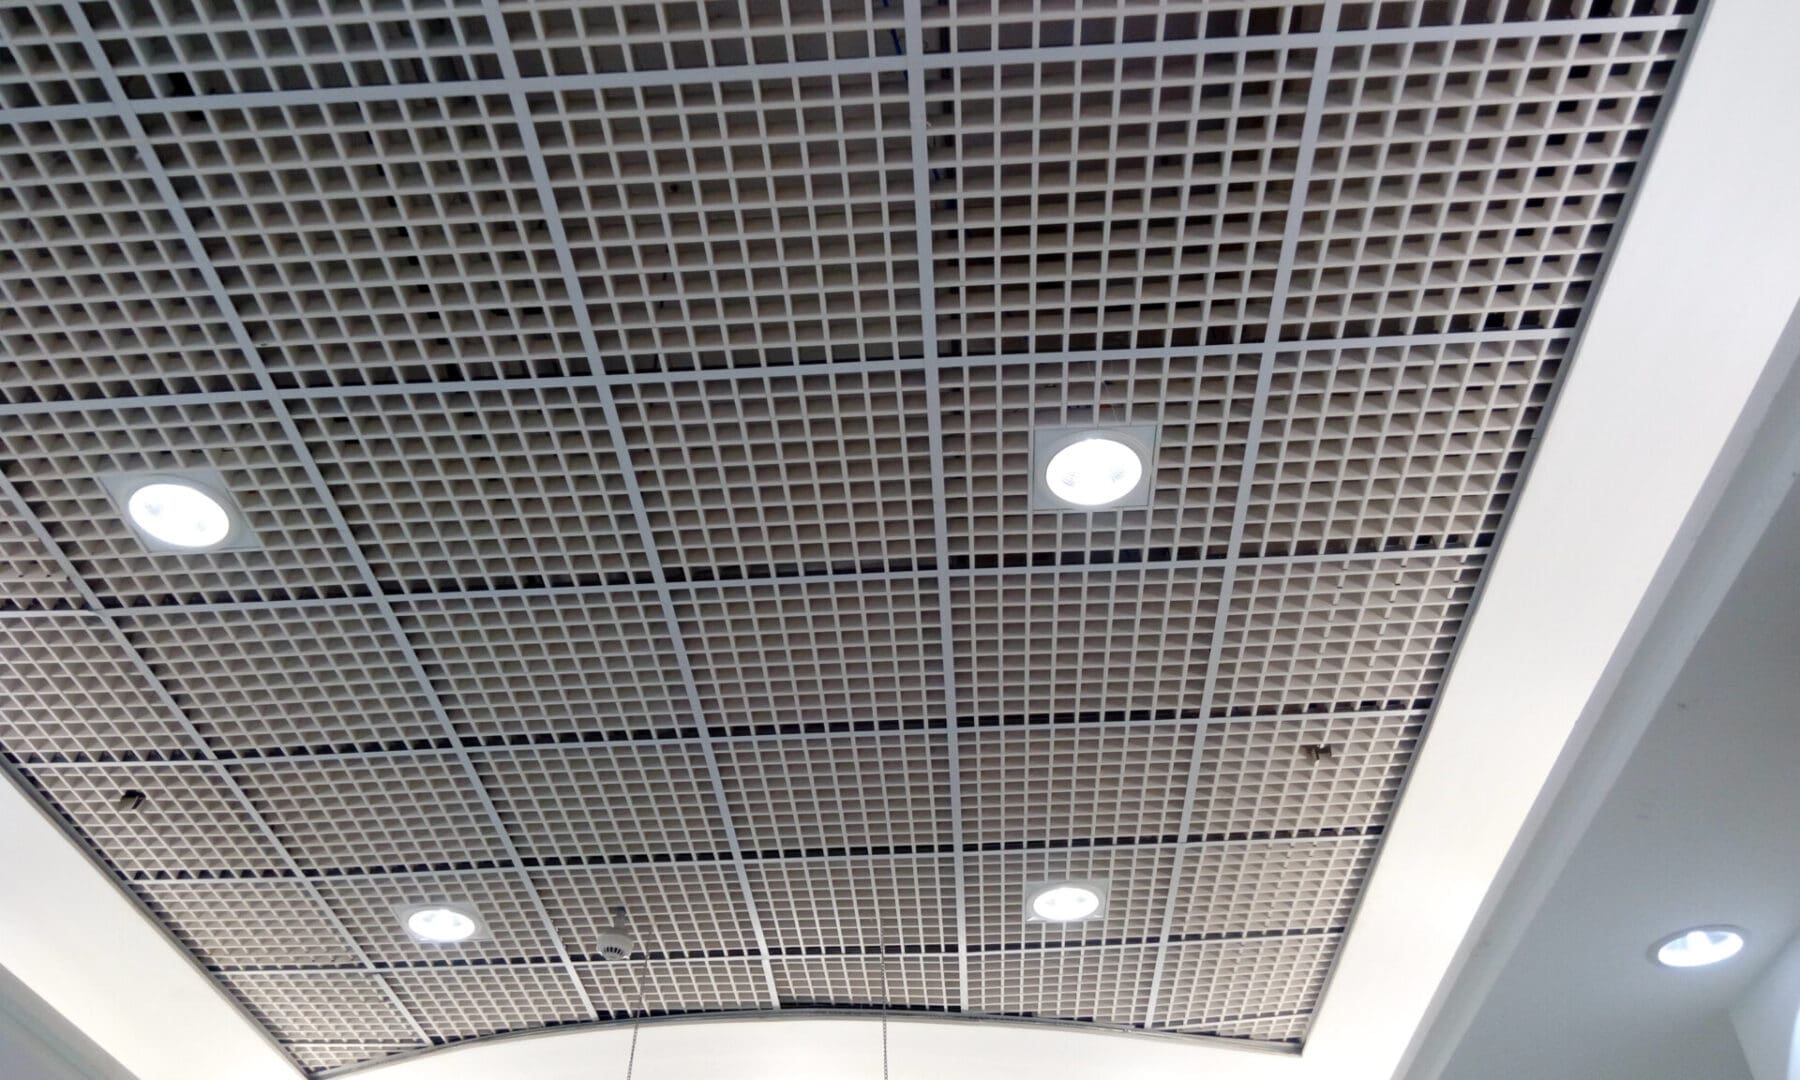 A ceiling with some lights on it